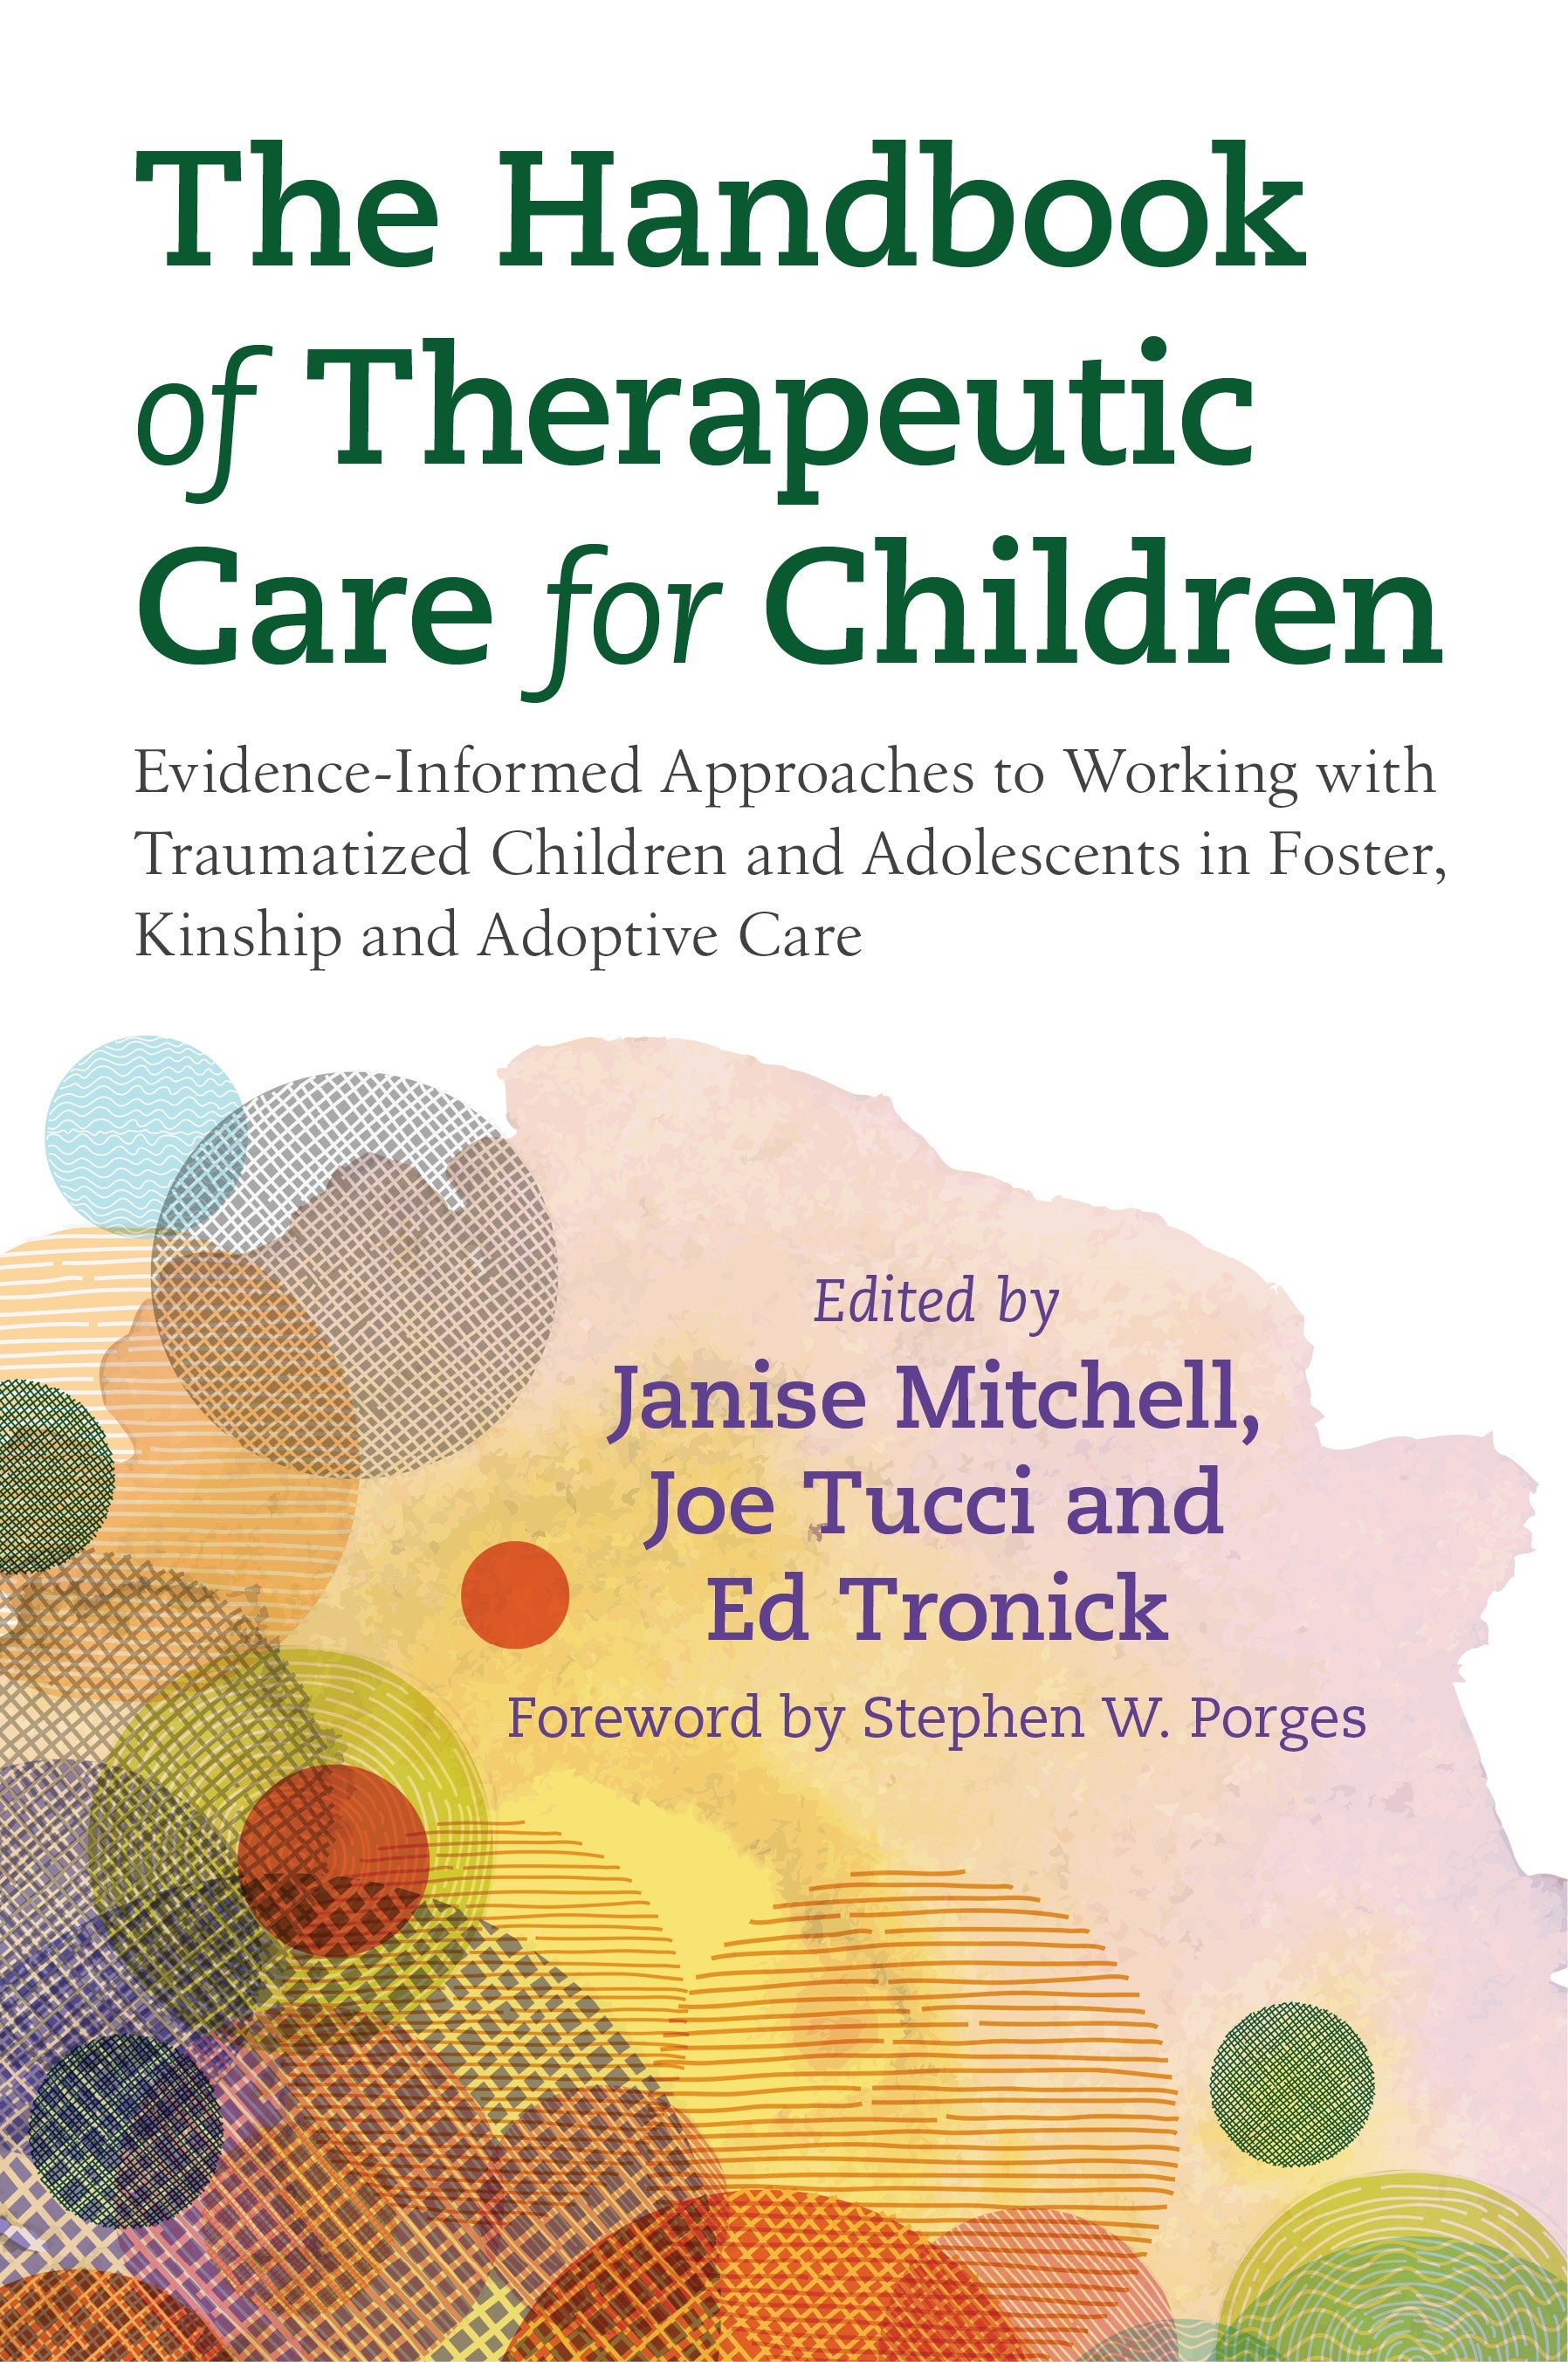 The Handbook of Therapeutic Care for Children by Stephen W. Porges, Janise Mitchell, Joe Tucci, Edward C Tronick, No Author Listed